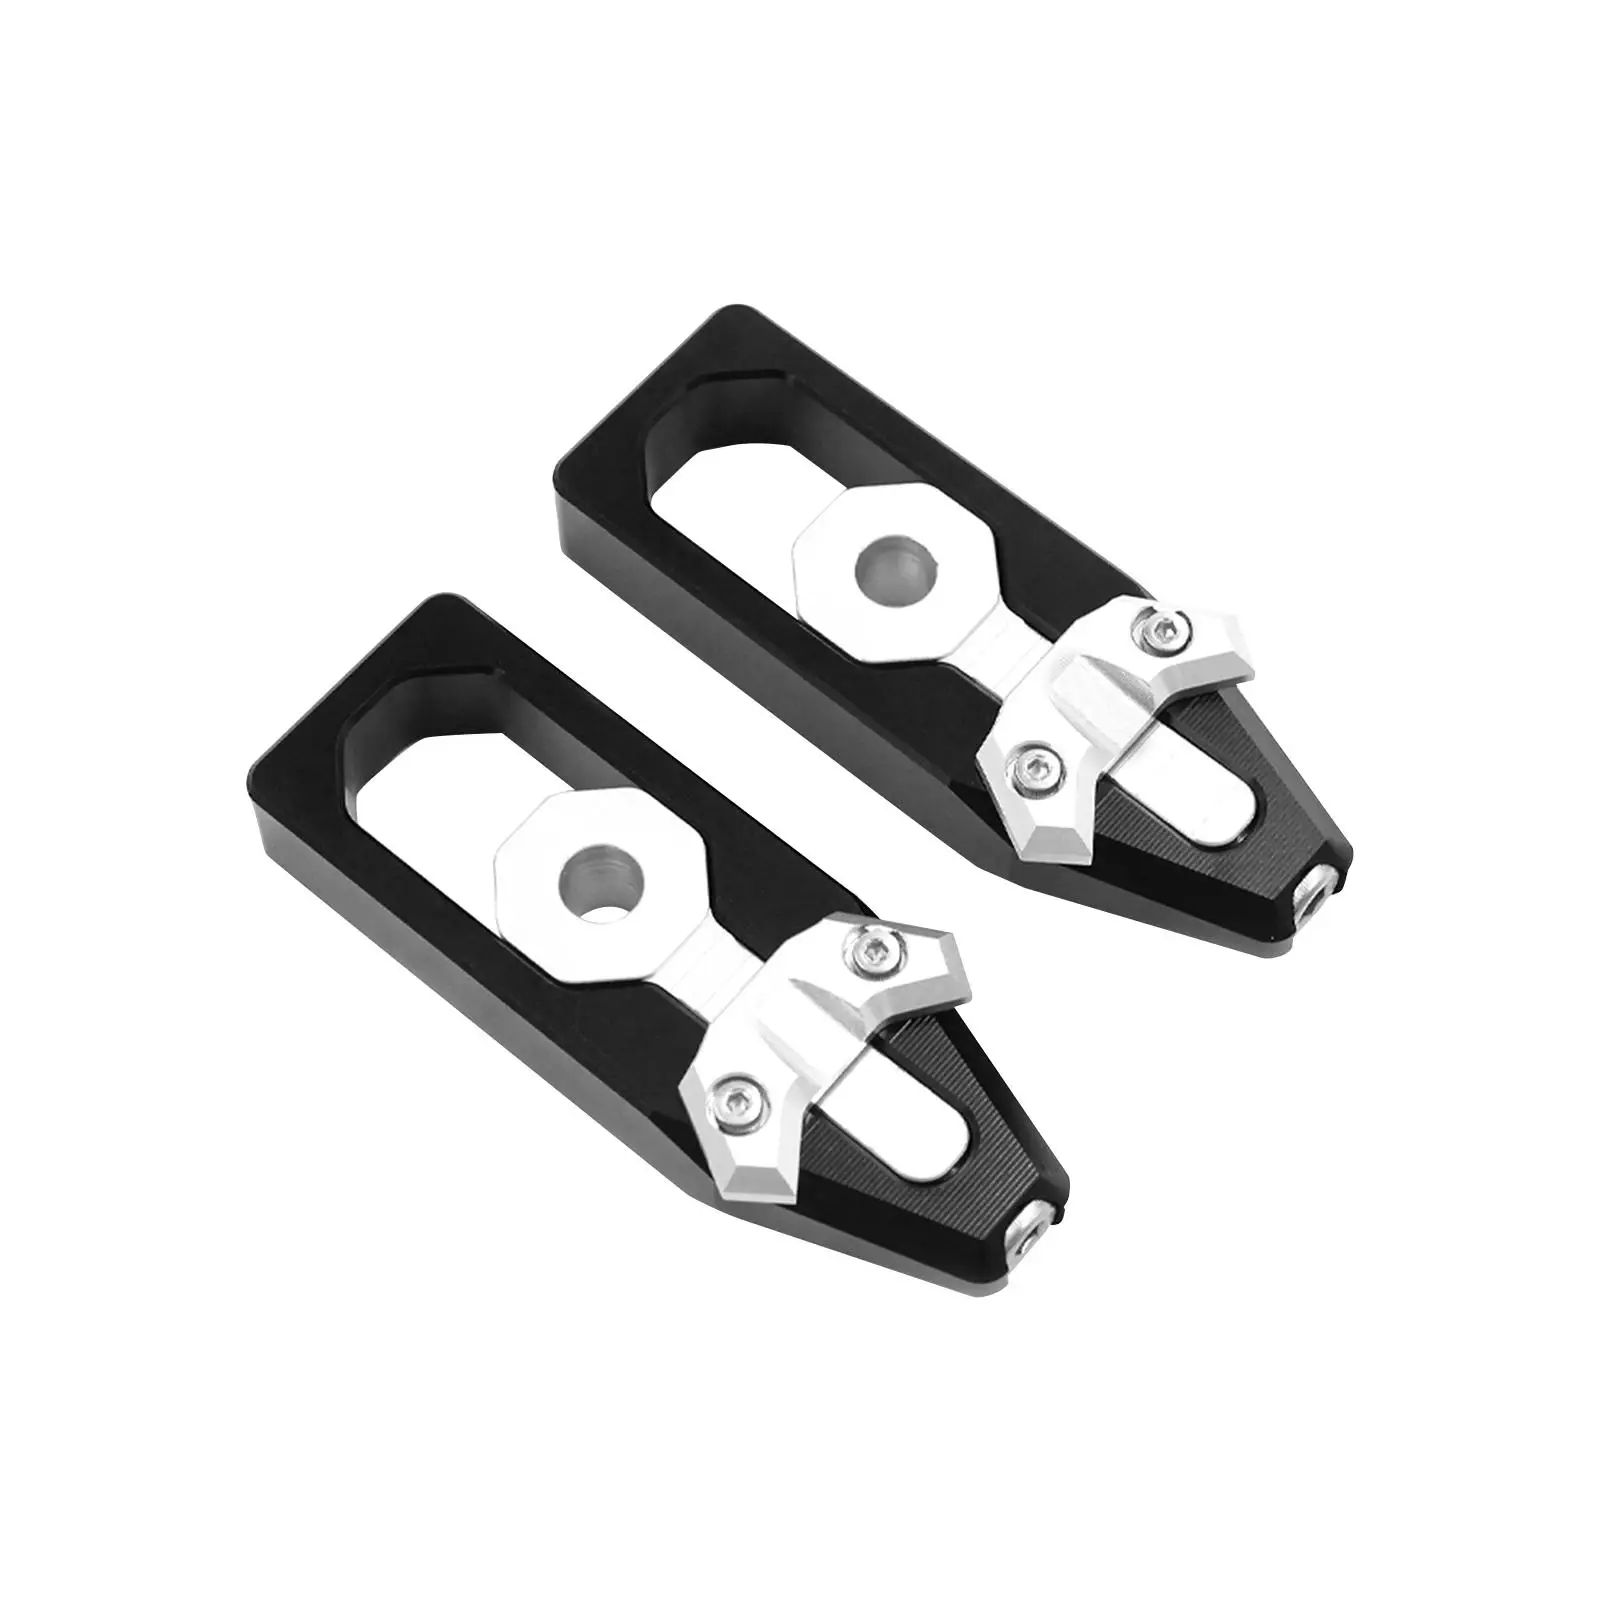 2 Pieces Motorcycle Chain Adjuster set Alloy For honda Grom 2014-2020